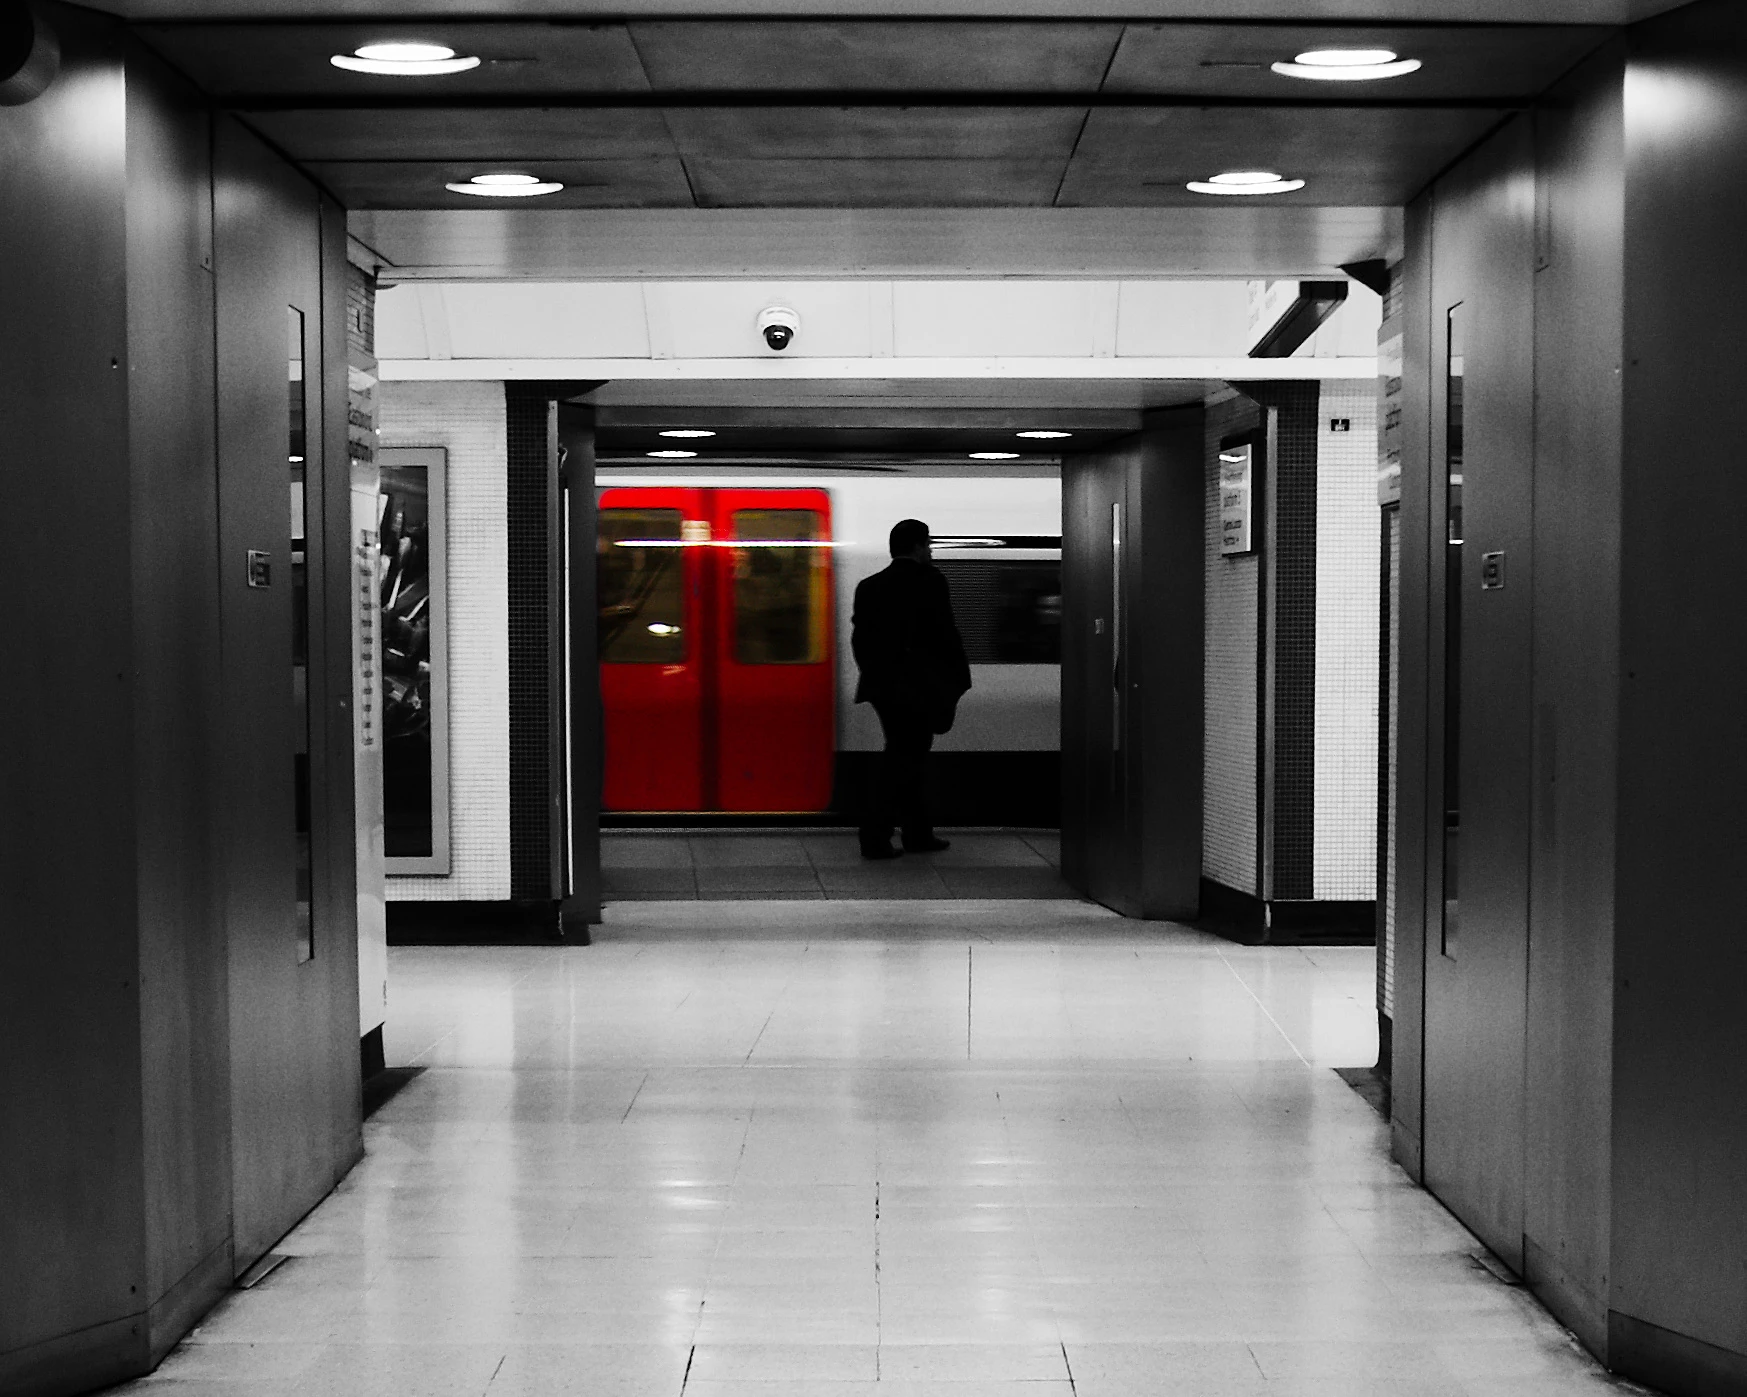 A commuter waiting on the London Underground.